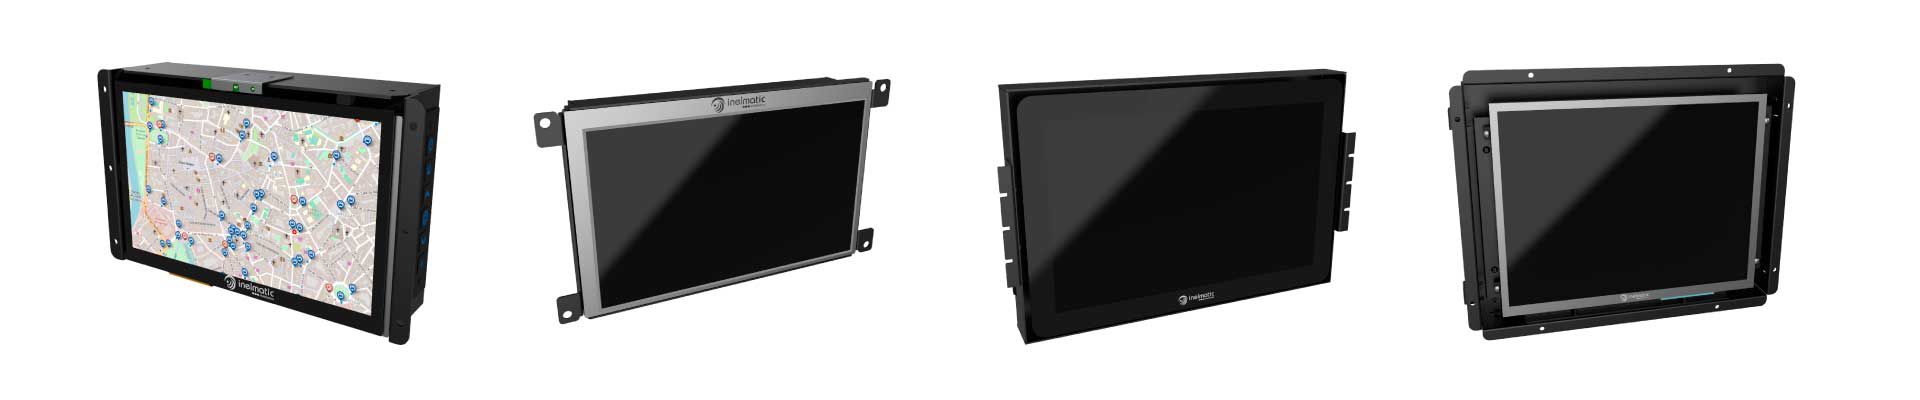 Military open frame monitor - Inelmatic